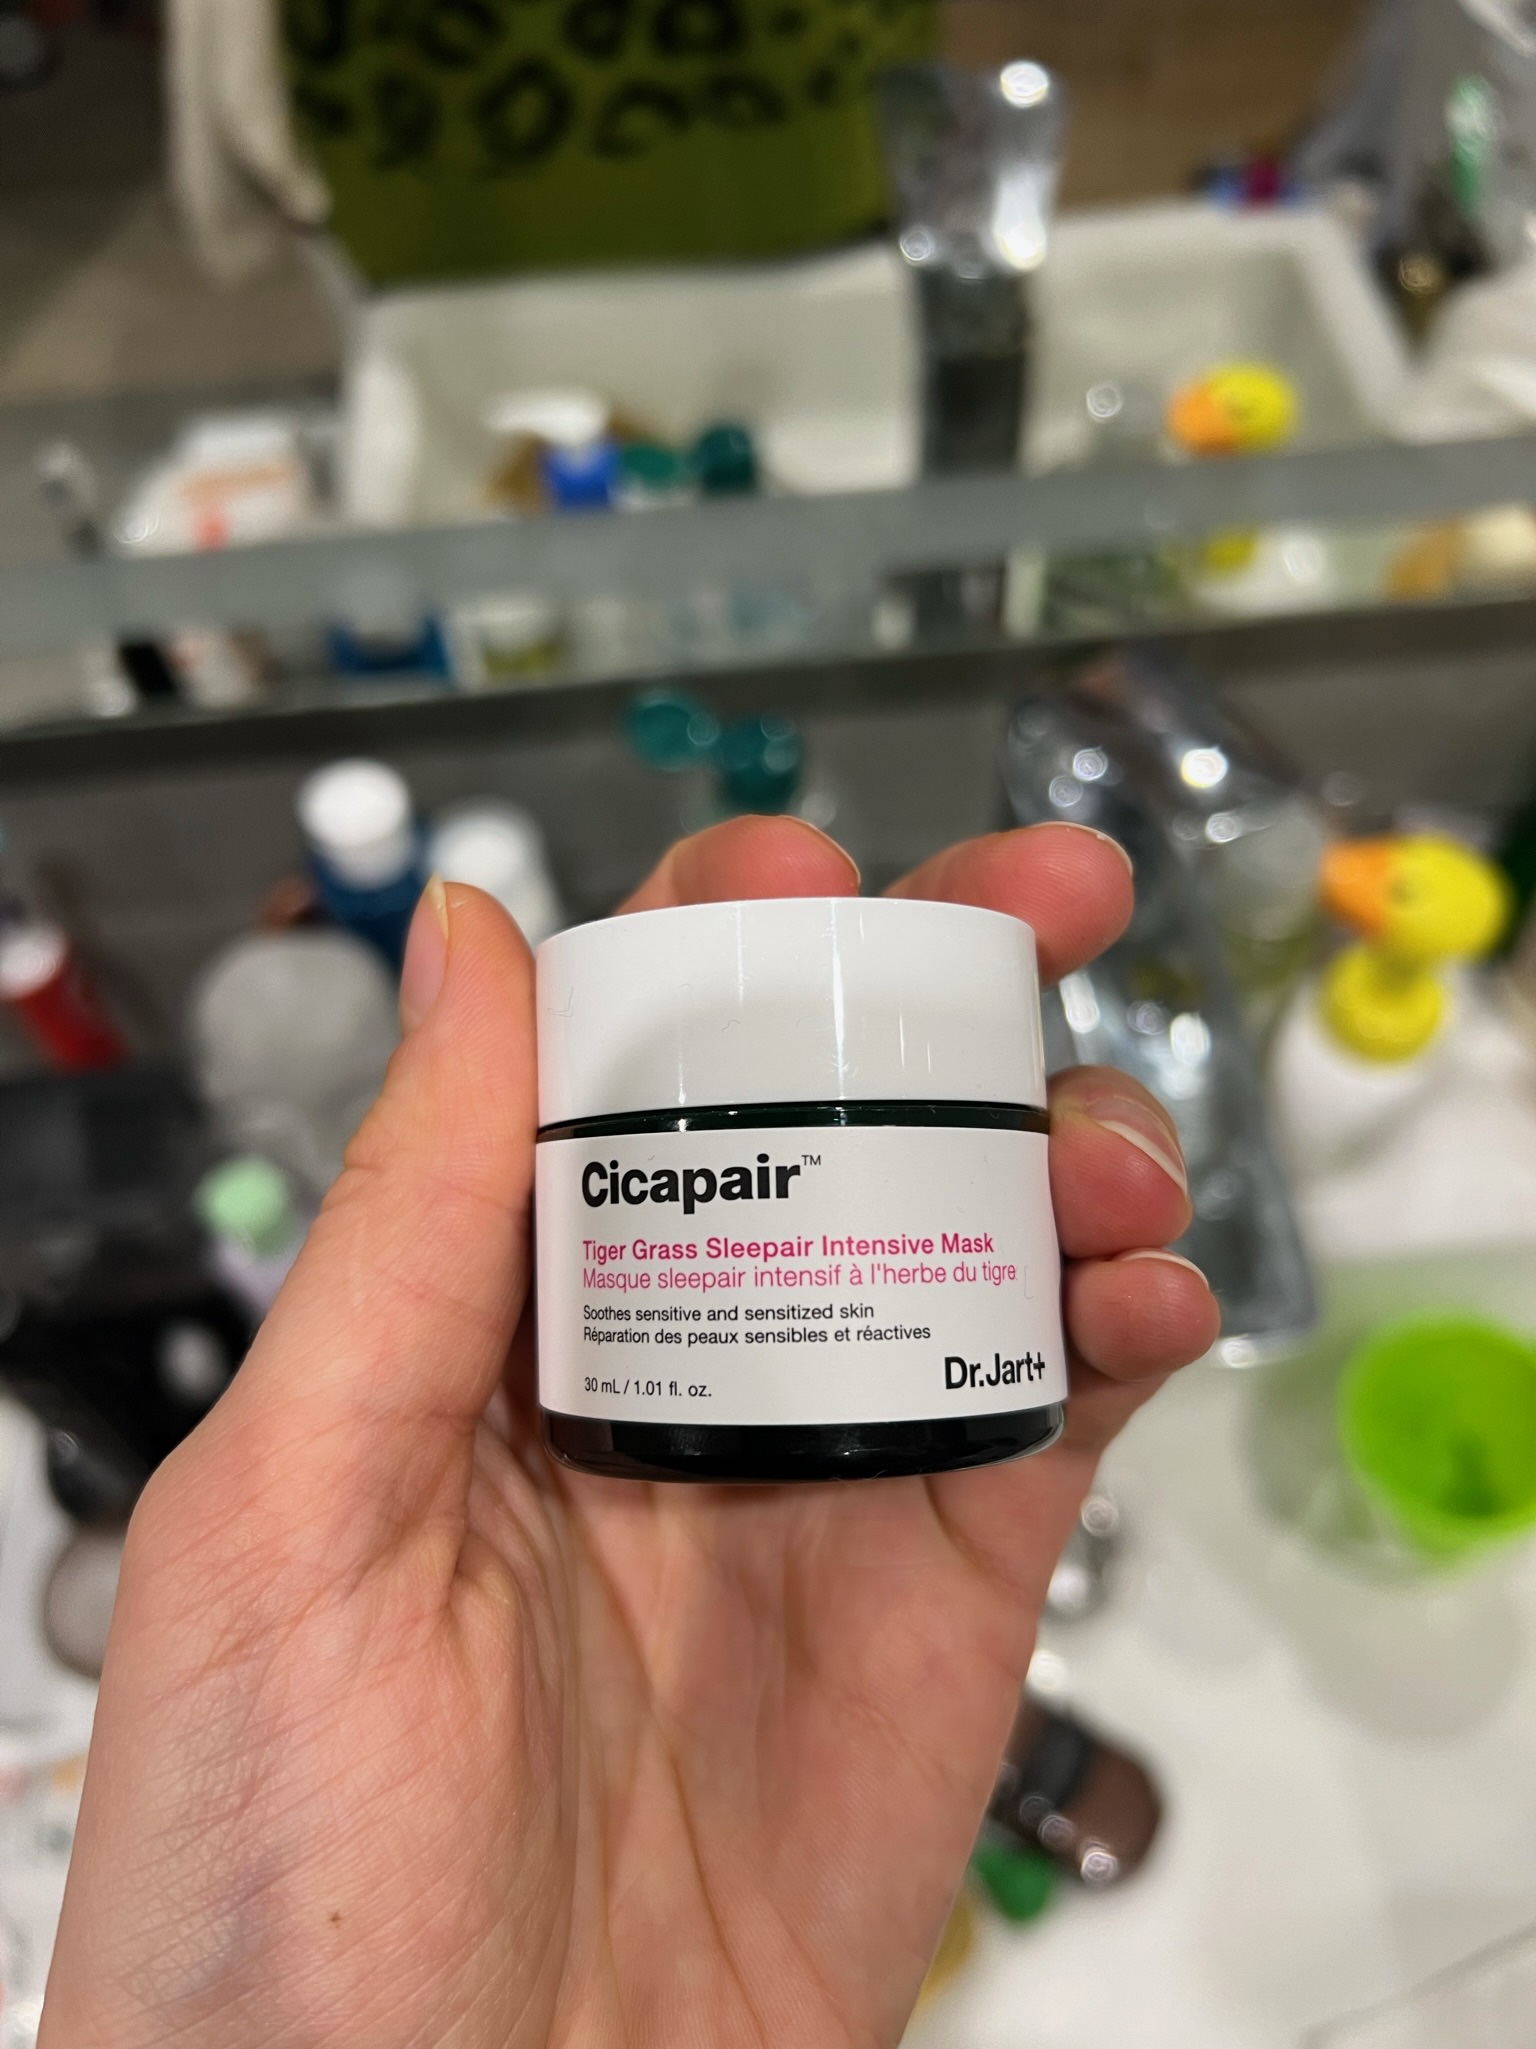 Review: Rejuvenate Your Skin Overnight with Dr. Jart+ Cicapair Tiger Grass Sleepair Intensive Mask